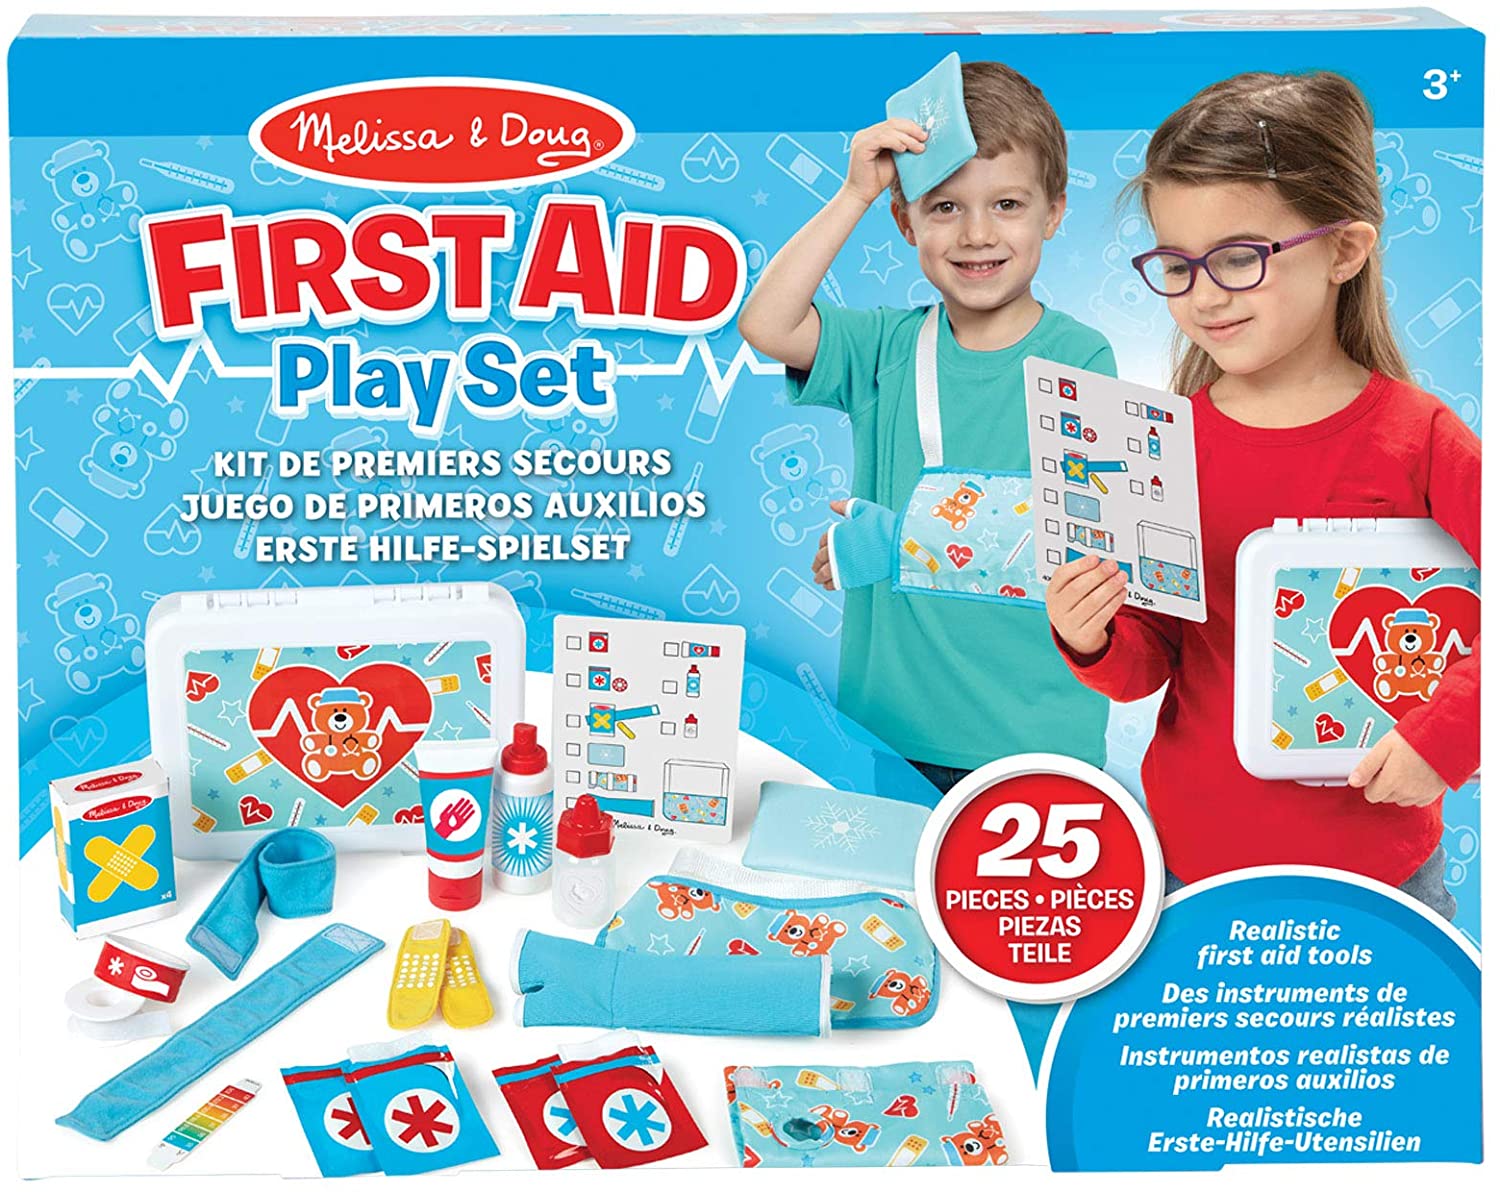 Doctor Play Set: Melissa & Doug Get Well Doctor's Kit Play Set – 25 Toy  Pieces - Science Shop For Kids